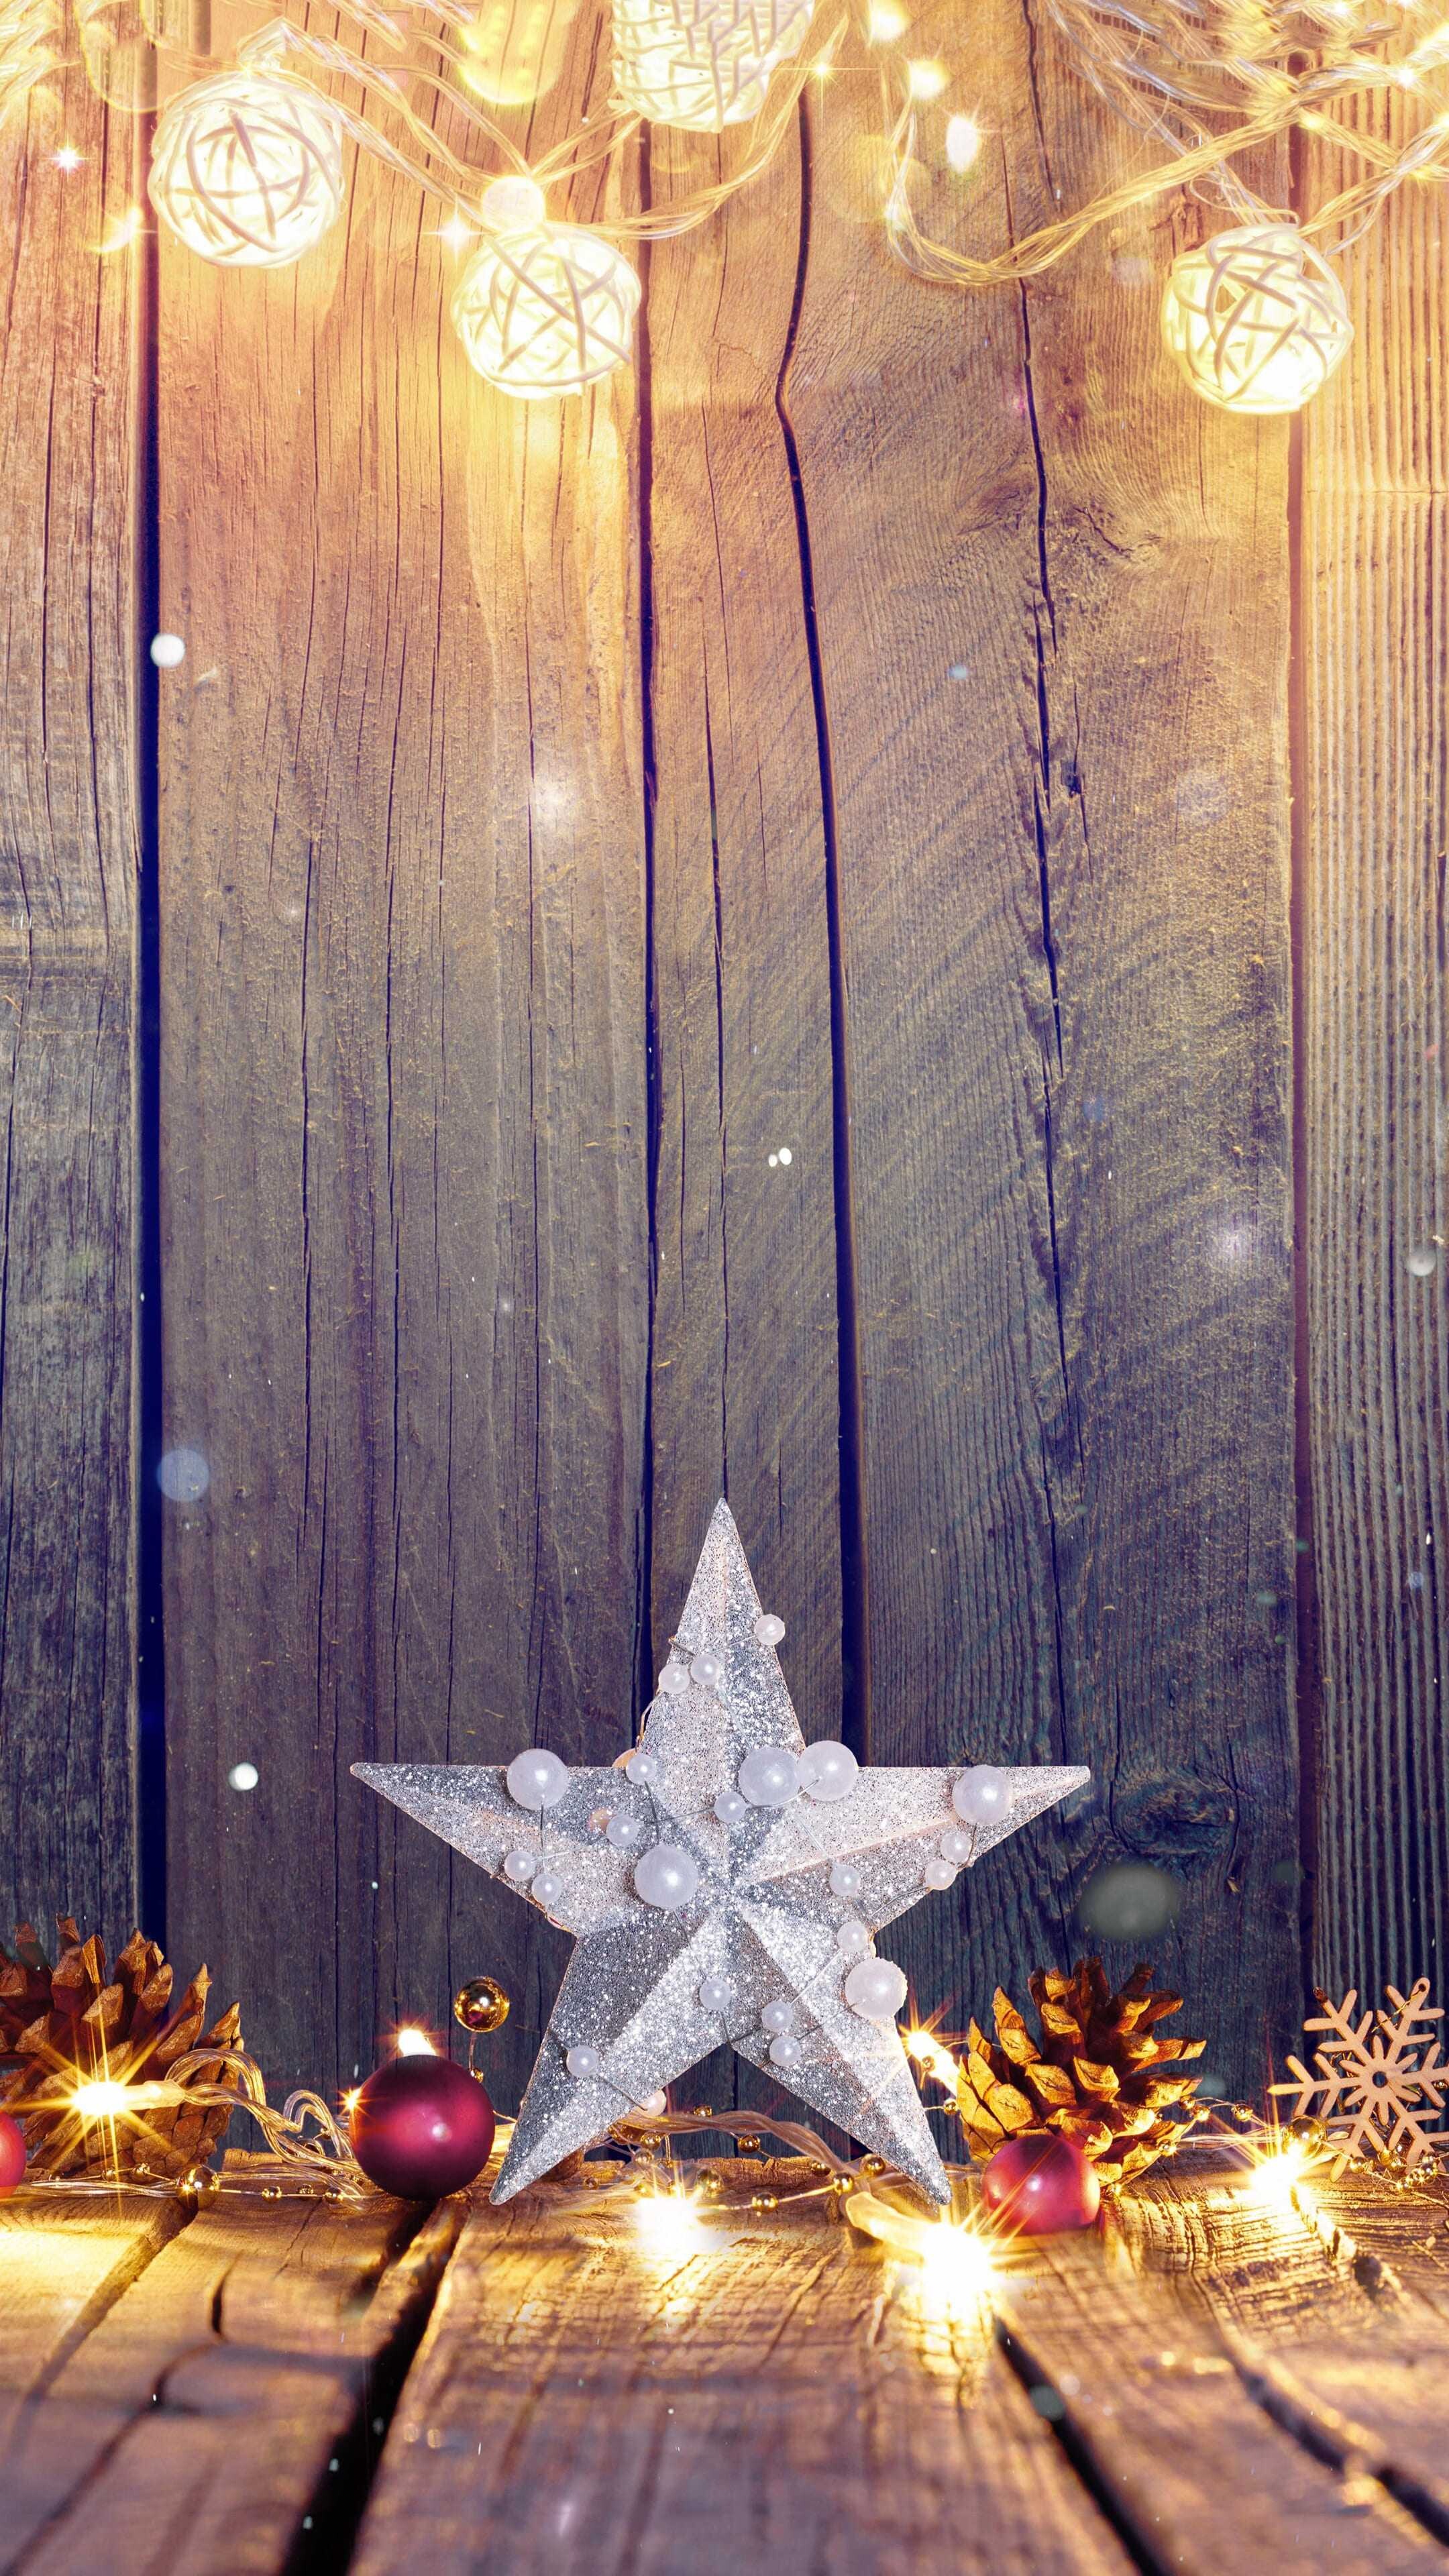 Gold Lights: Christmas star lights, Outdoor decoration, Pine-cone, Holiday ornament. 2160x3840 4K Background.